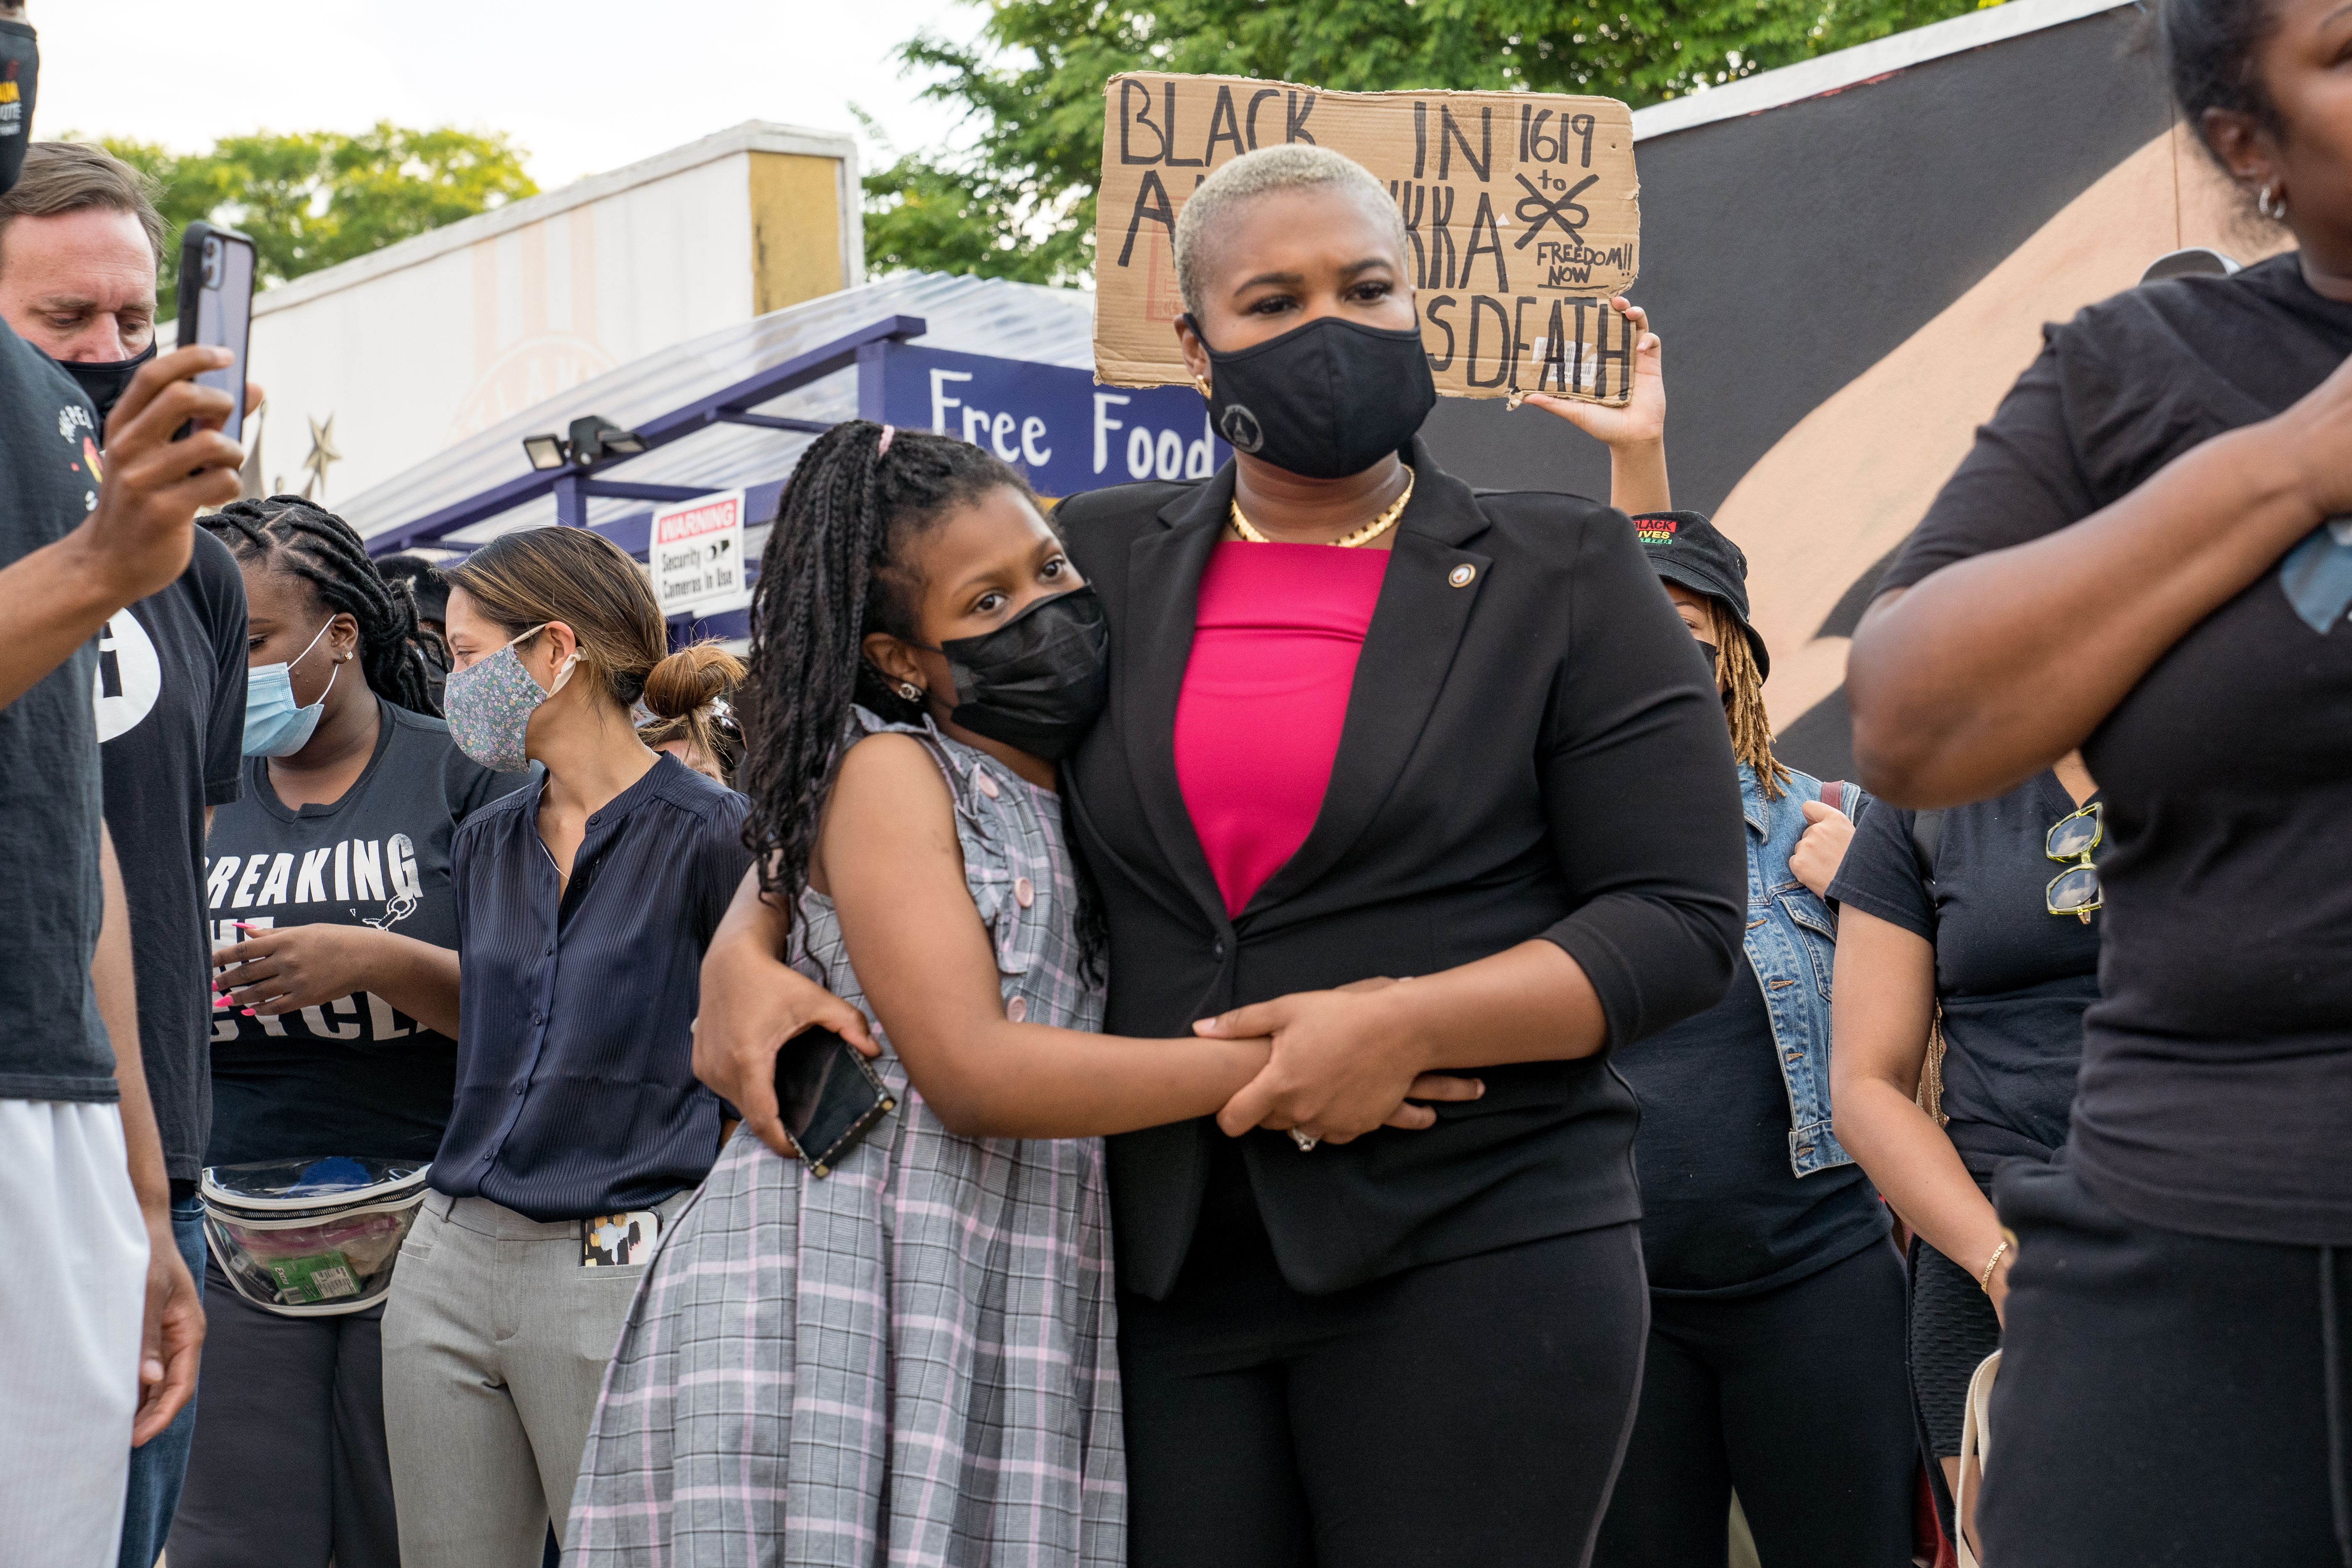 Georgia state representative Erica Thomas hugs her daughter while listening to speakers speak before marching through the streets after the verdict was announced